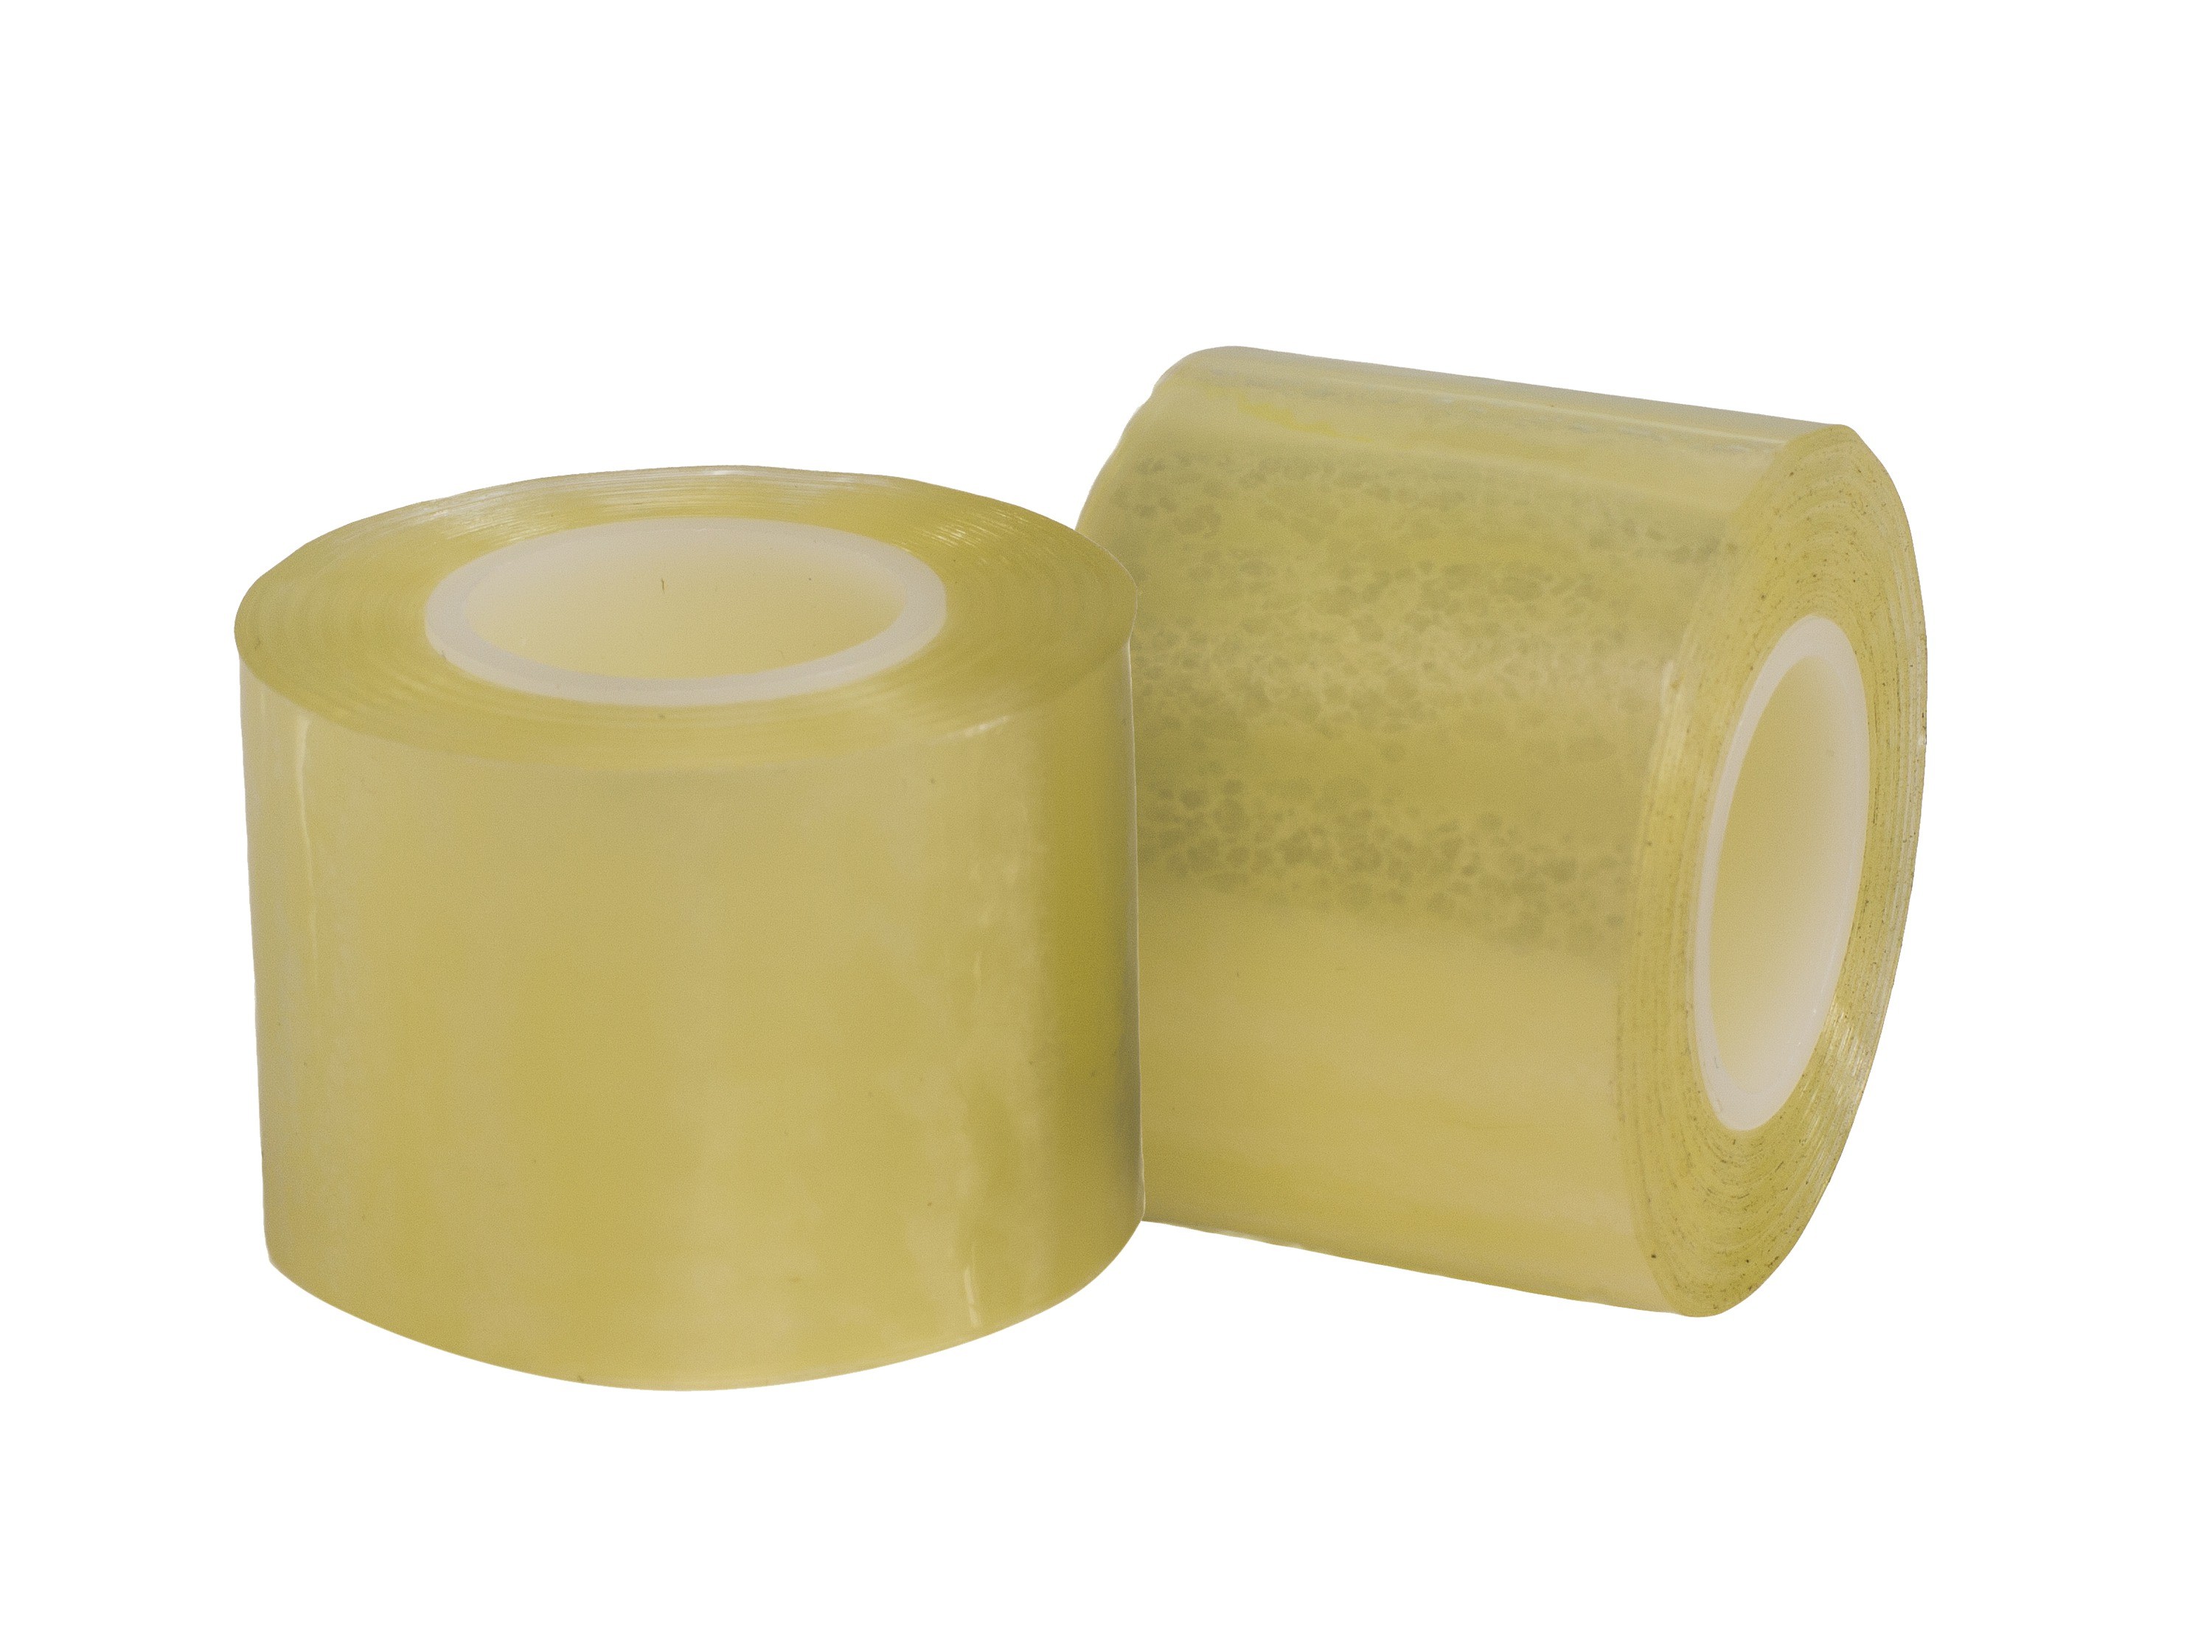 SP Bel-Art Clear Tape for Protective Labeling System; 36yd Length, 1¹/₂ in. Width, 1 in. Core (Pack of 2)